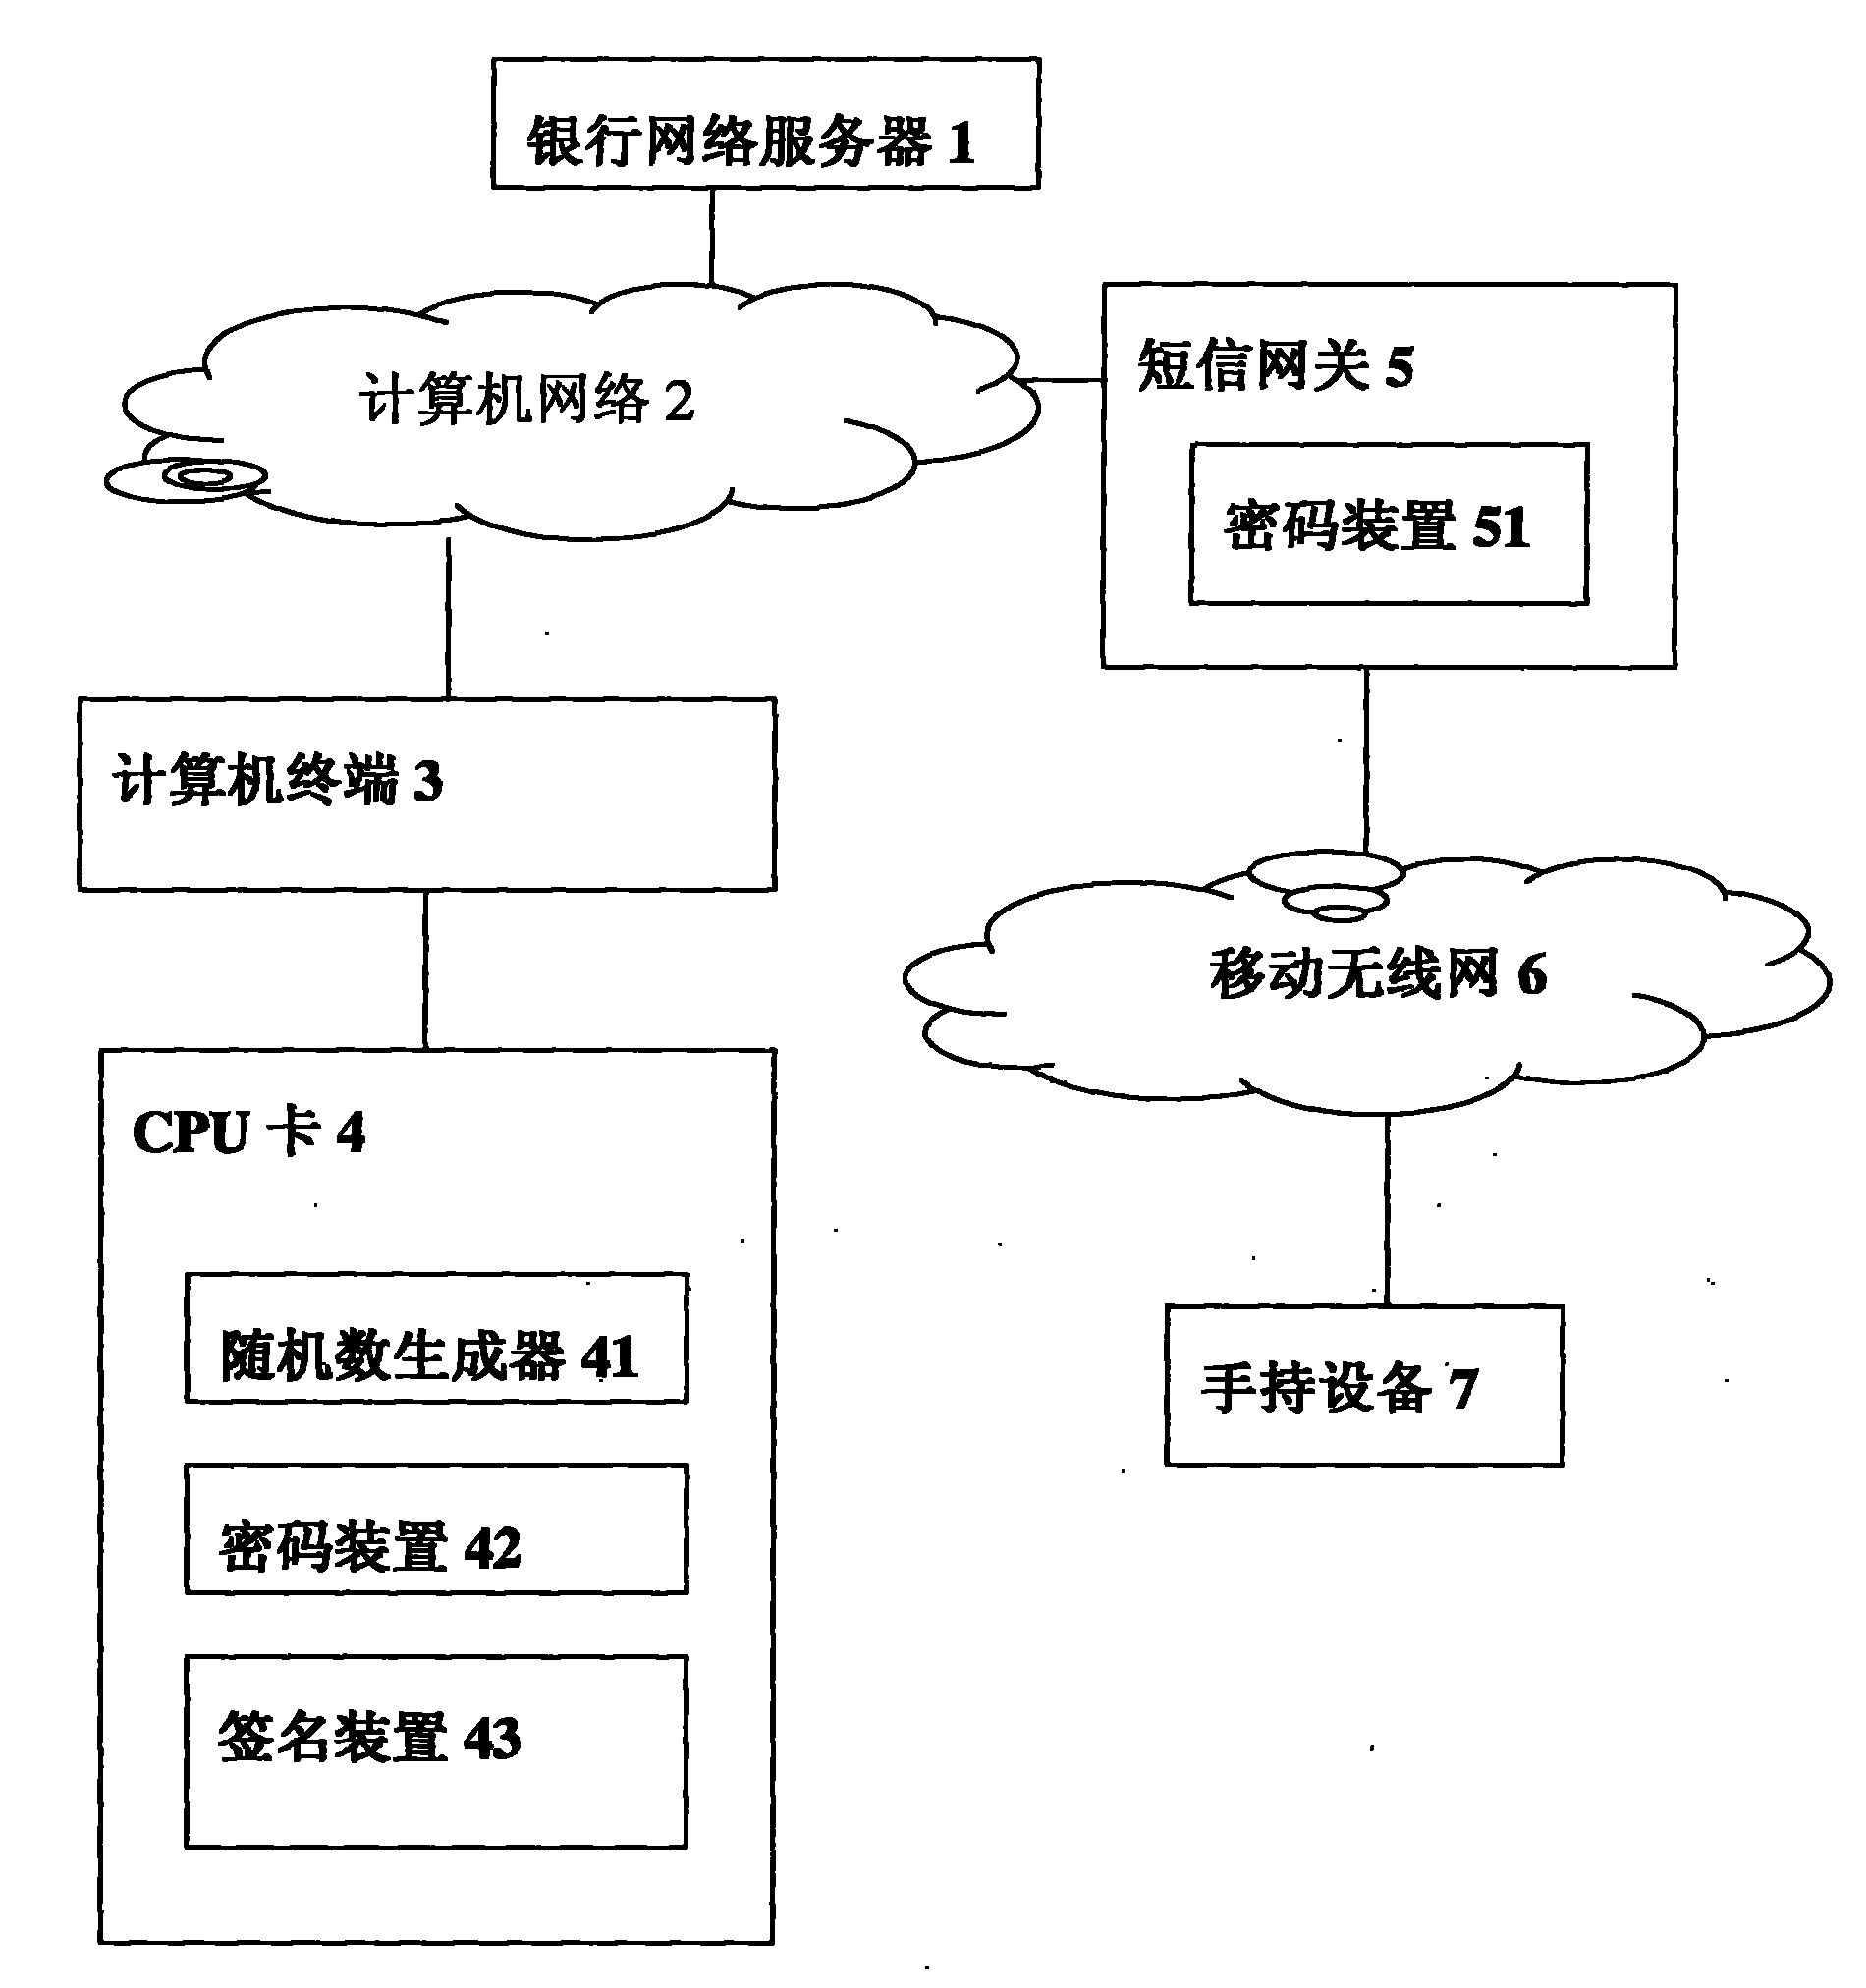 Method for confirming data in CPU (Central Processing Unit) card